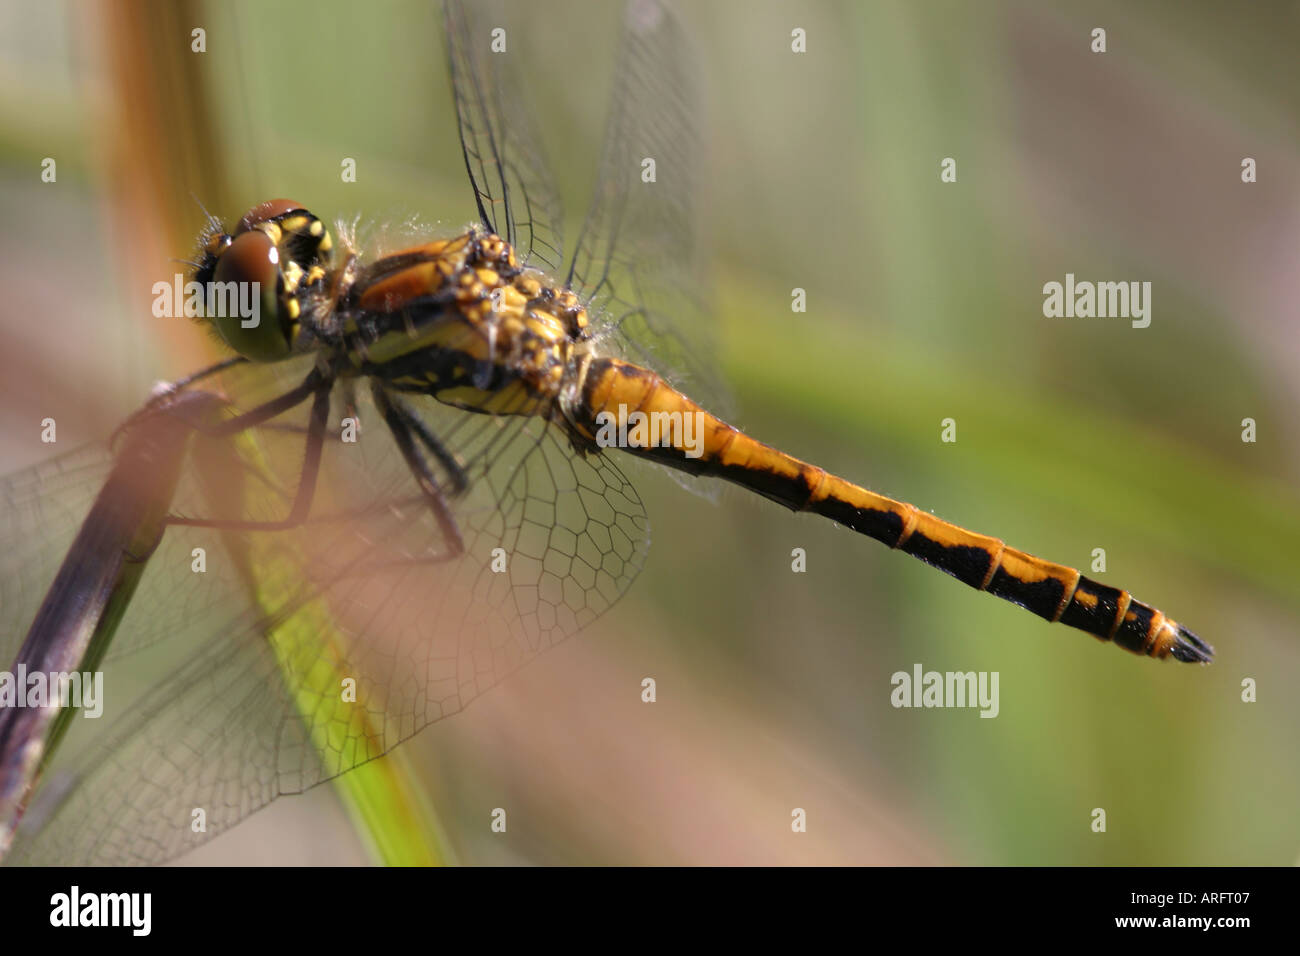 Immature Black Darter male dragonfly at rest Stock Photo